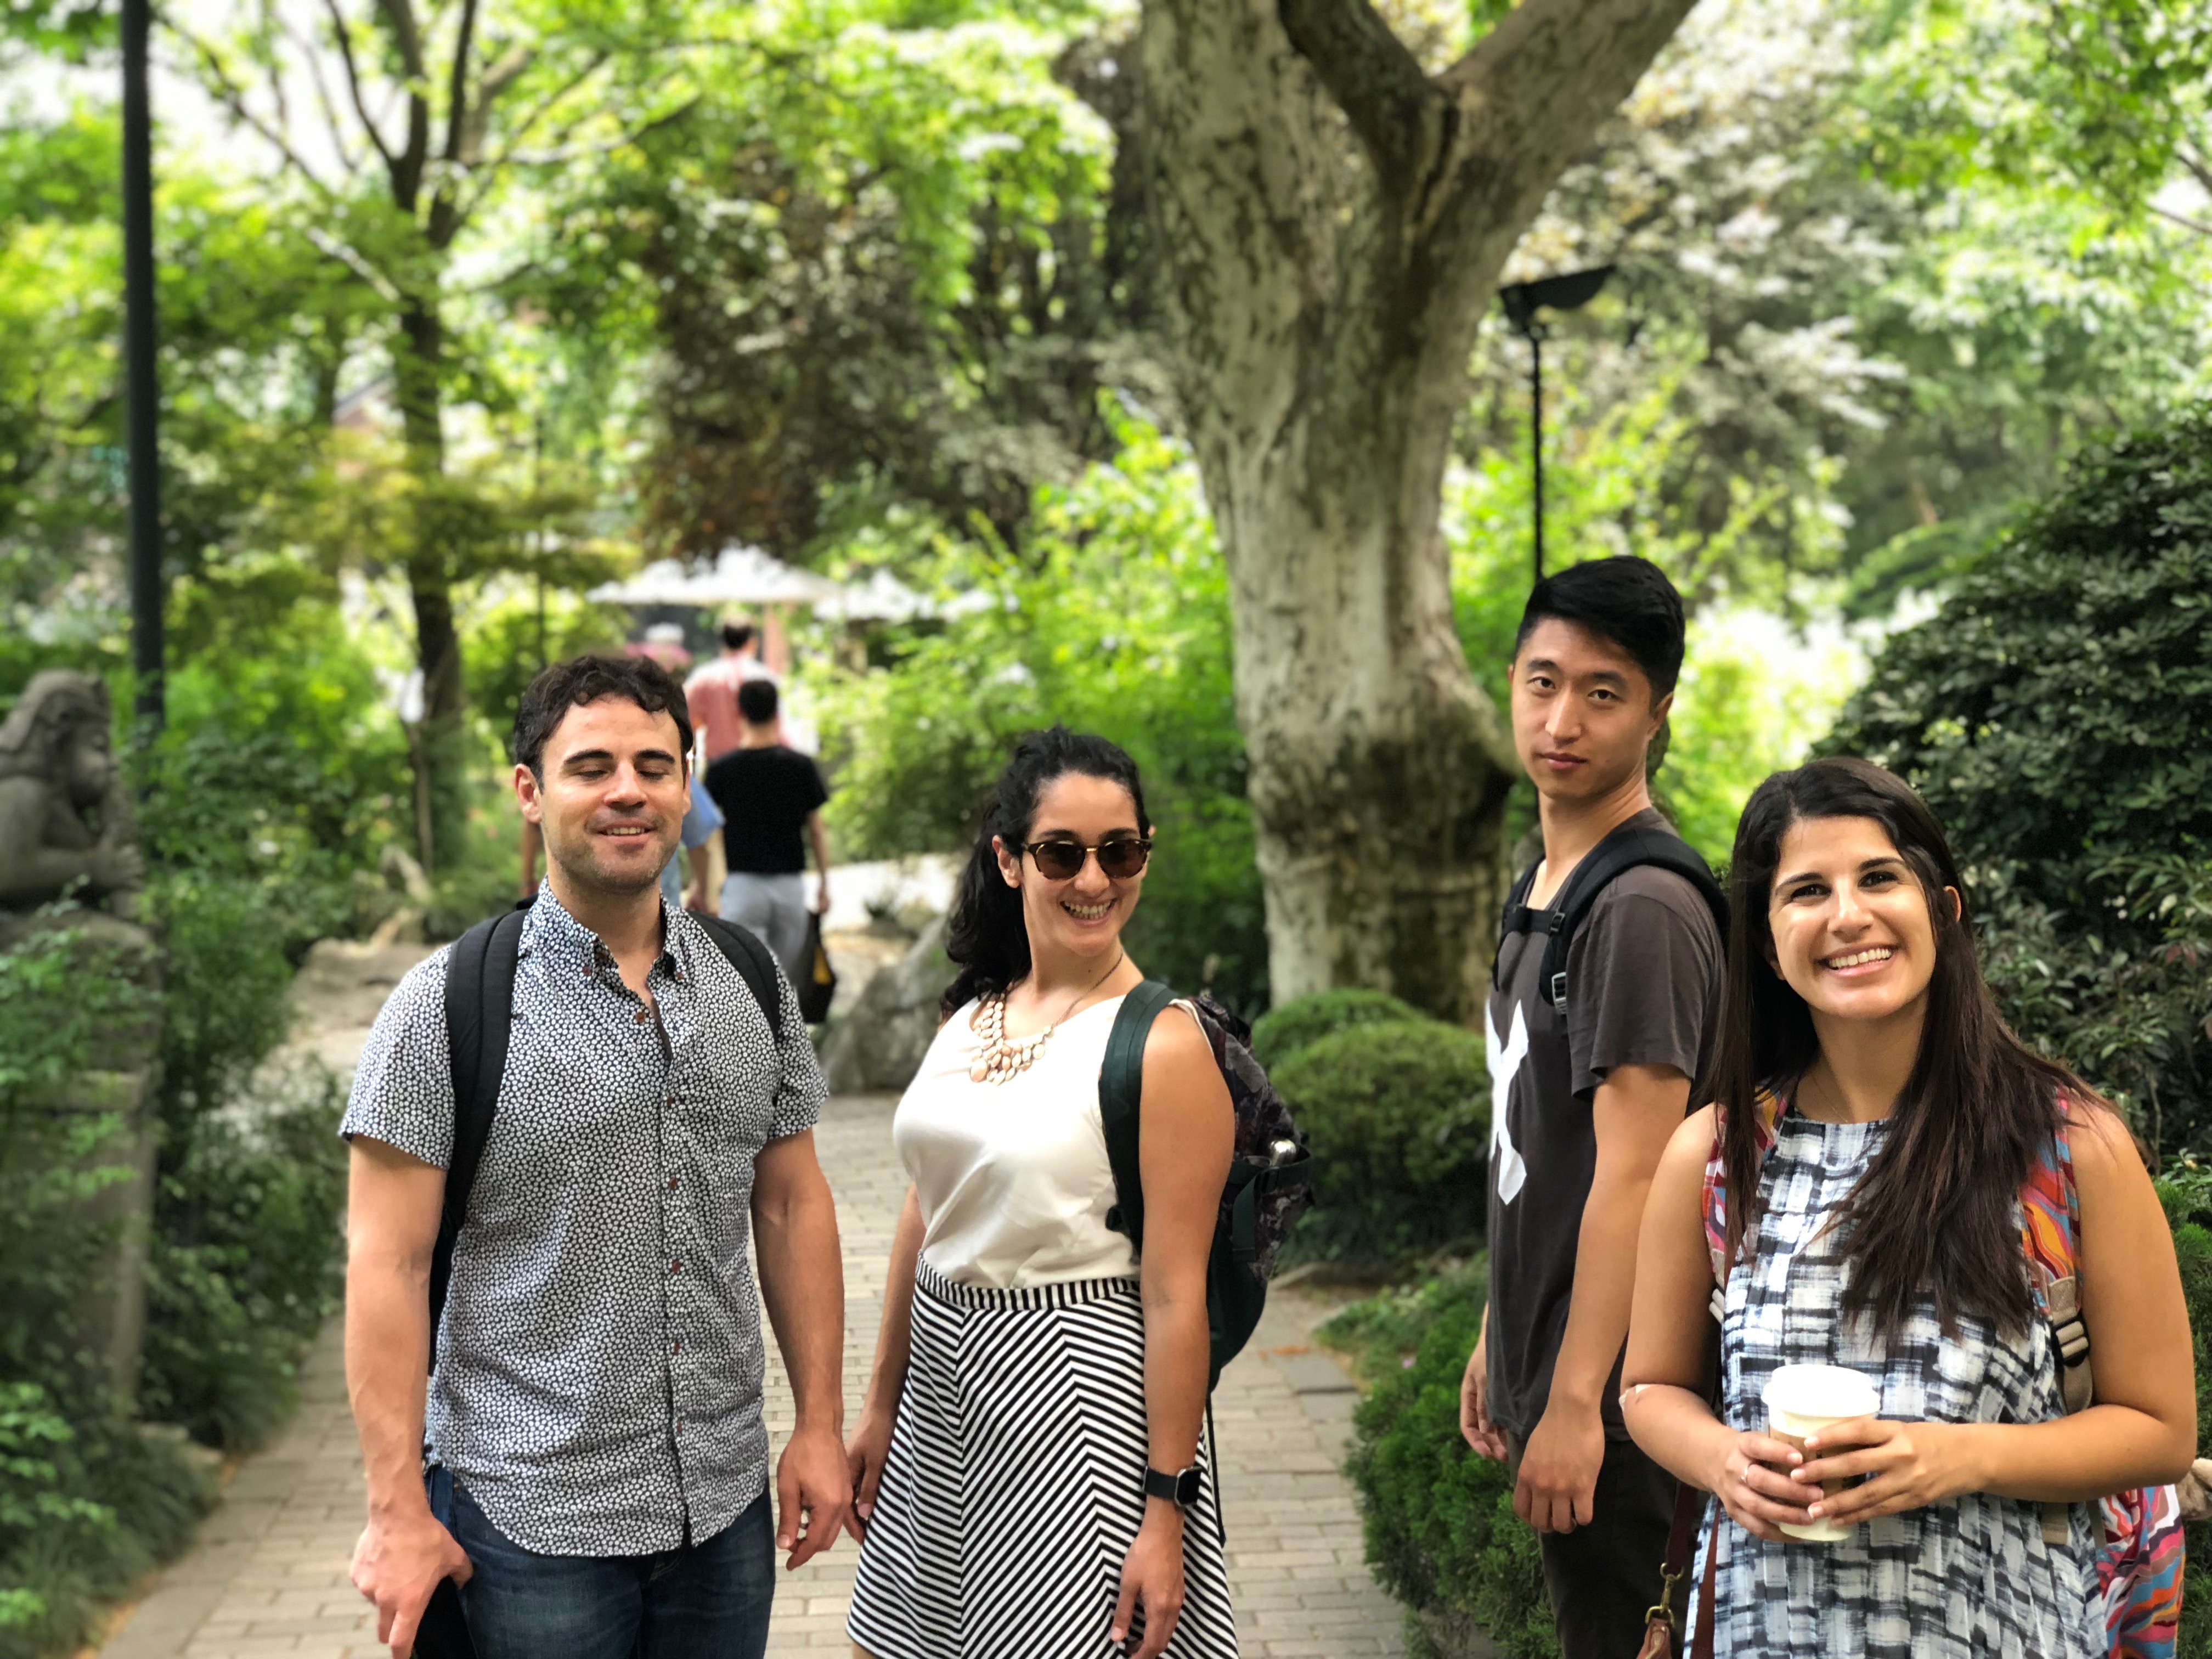 The Seedlink team on a lunchtime stroll through the Jing’An gardens.